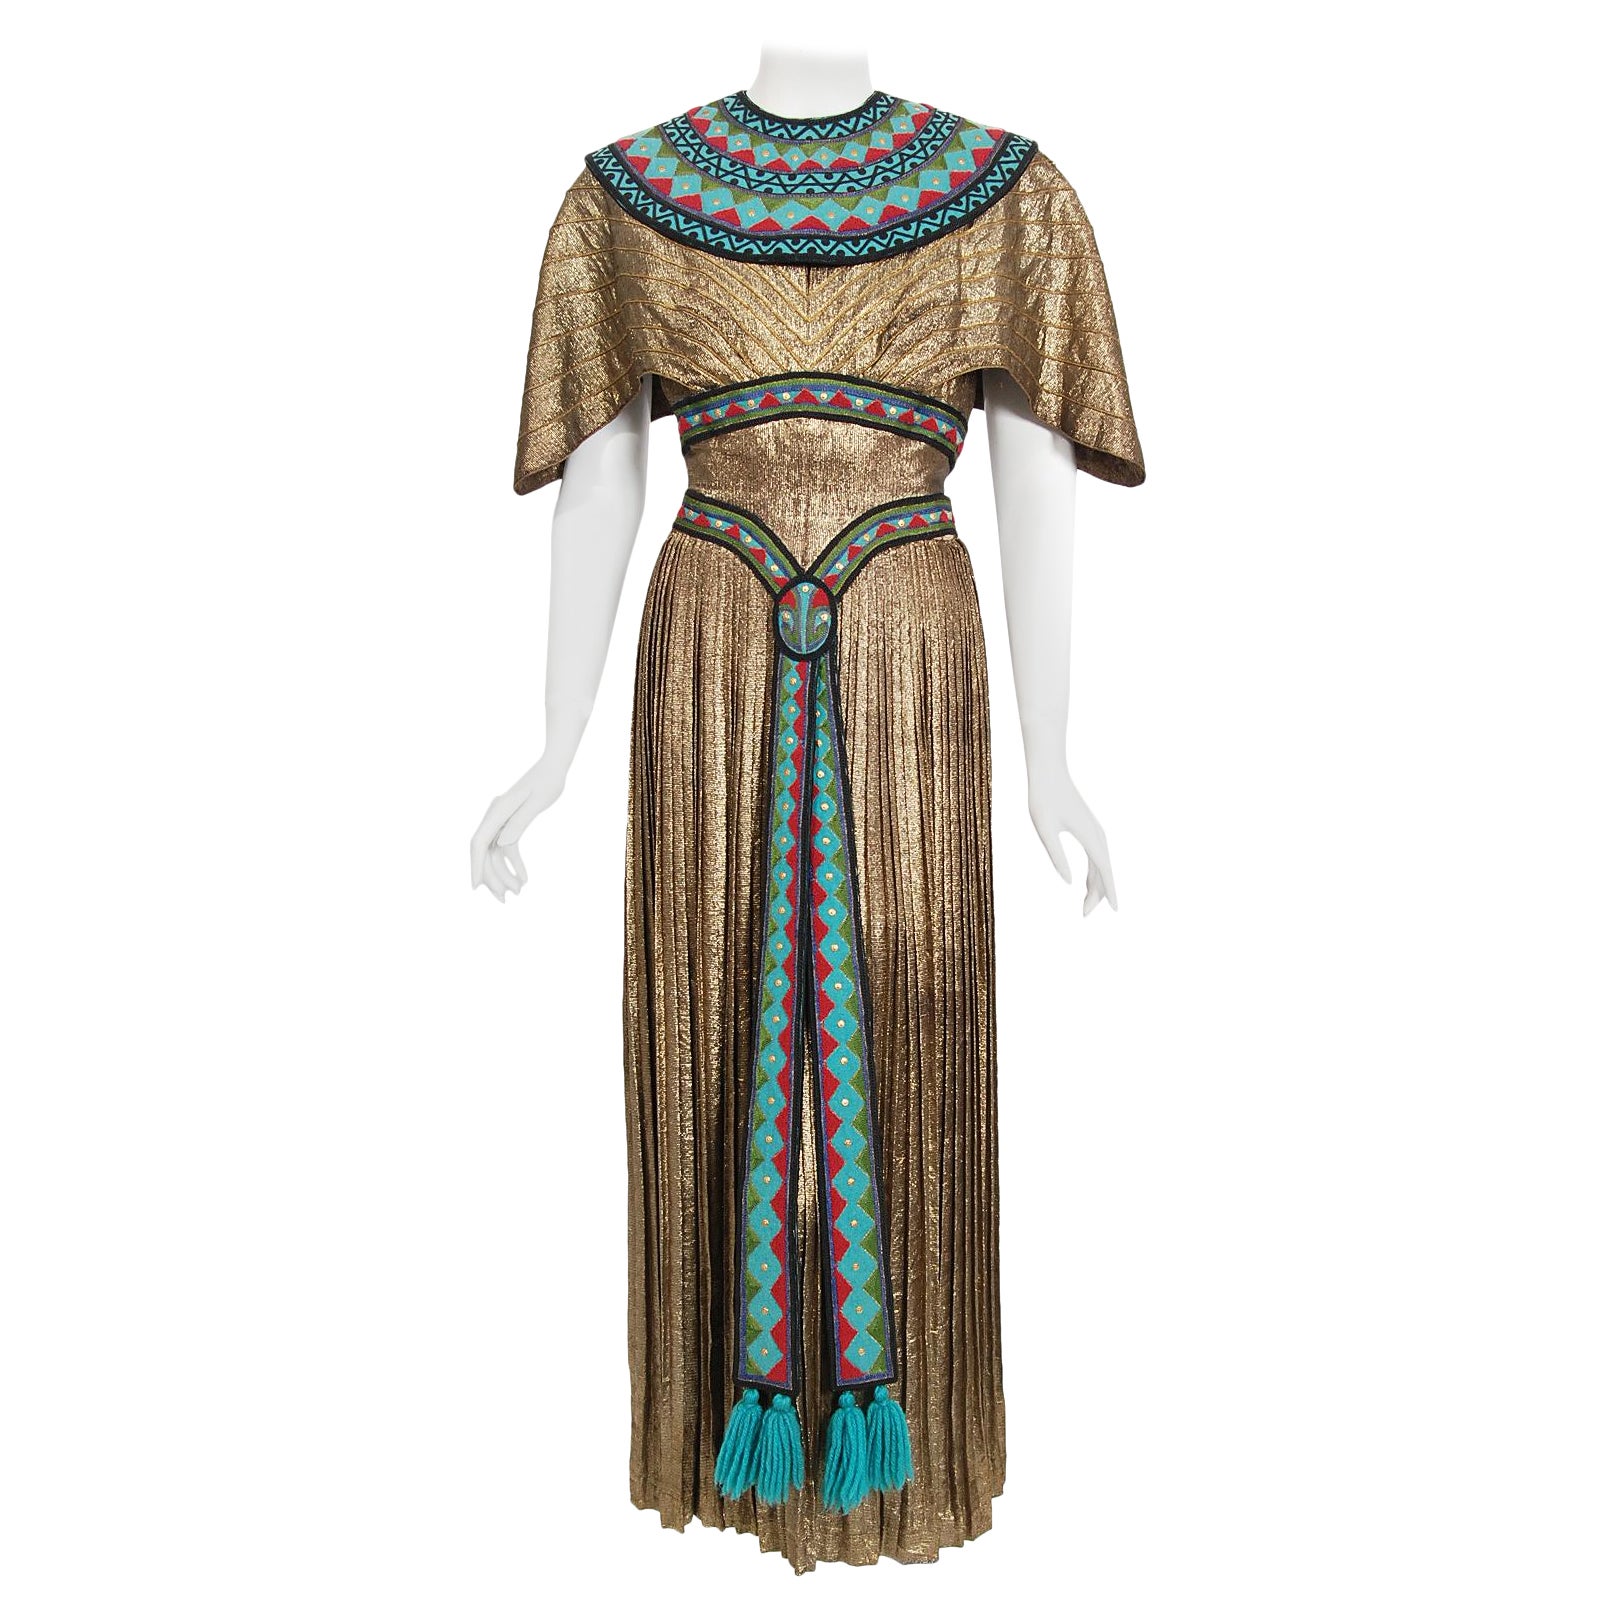 Vintage 1951 Helen Rose Gold Lamé Egyptian 'The Great Caruso' Film-Worn Dress